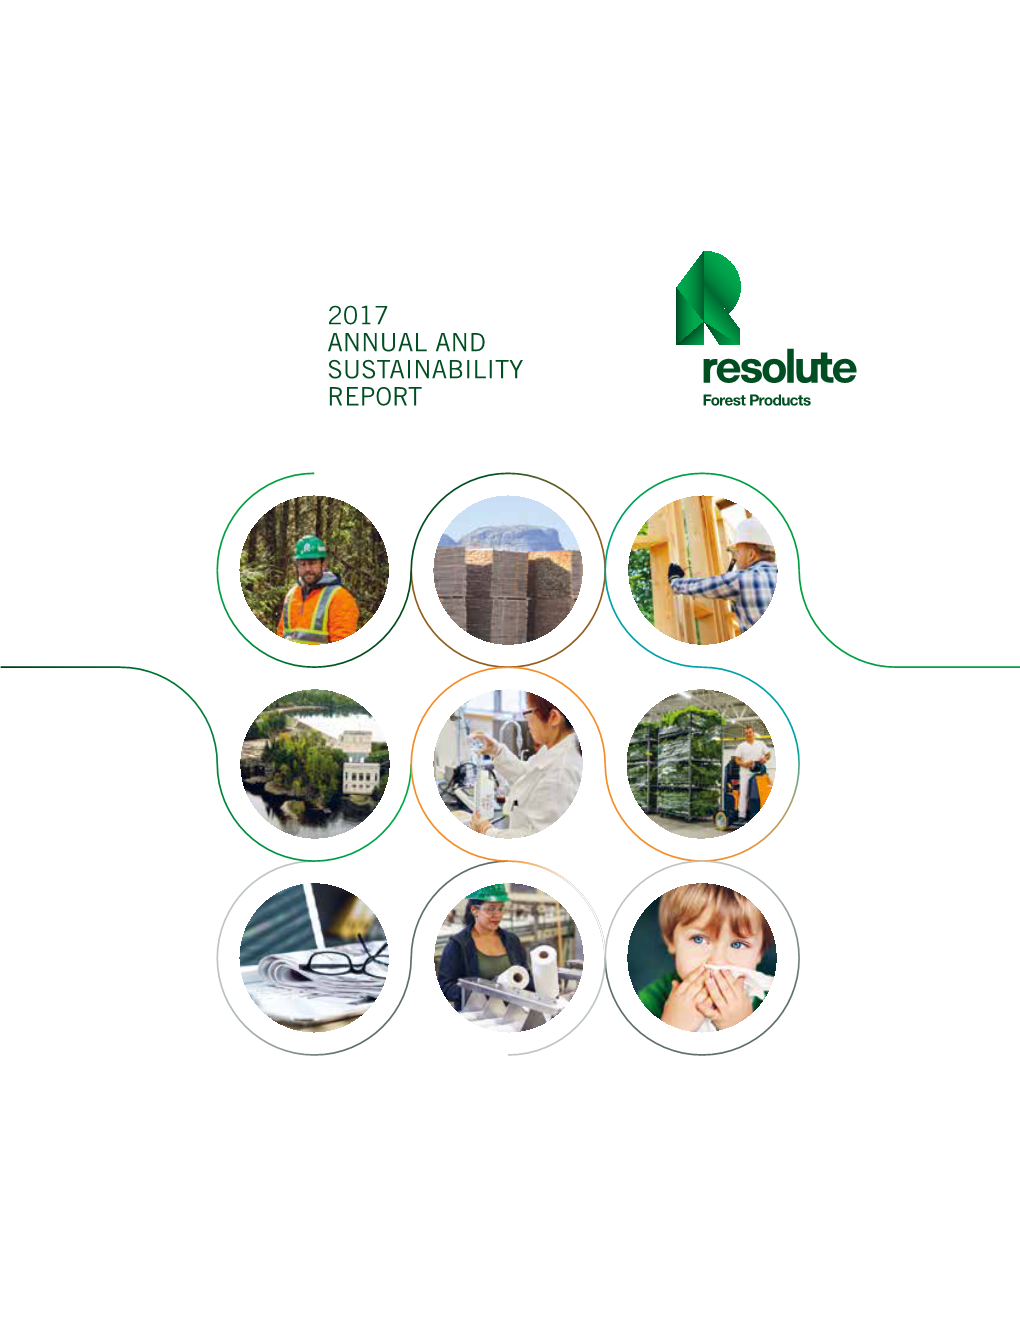 2017 Annual and Sustainability Report